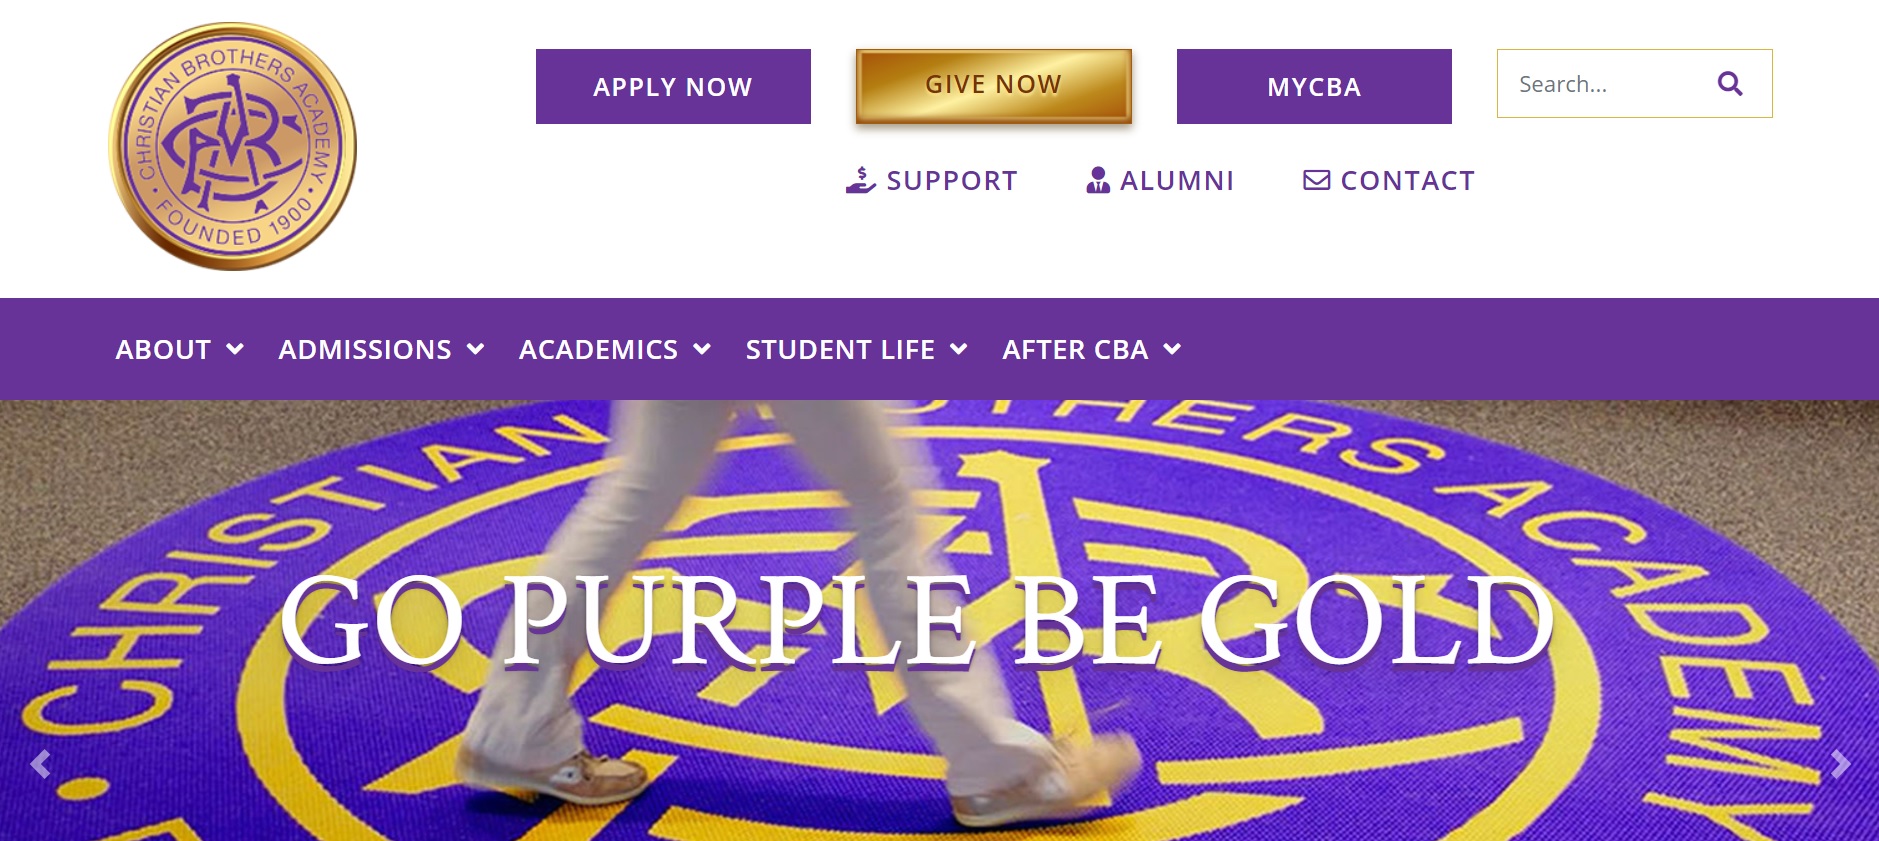 private school website design image of cba purple and gold with go purple be gold text and website navigation menu